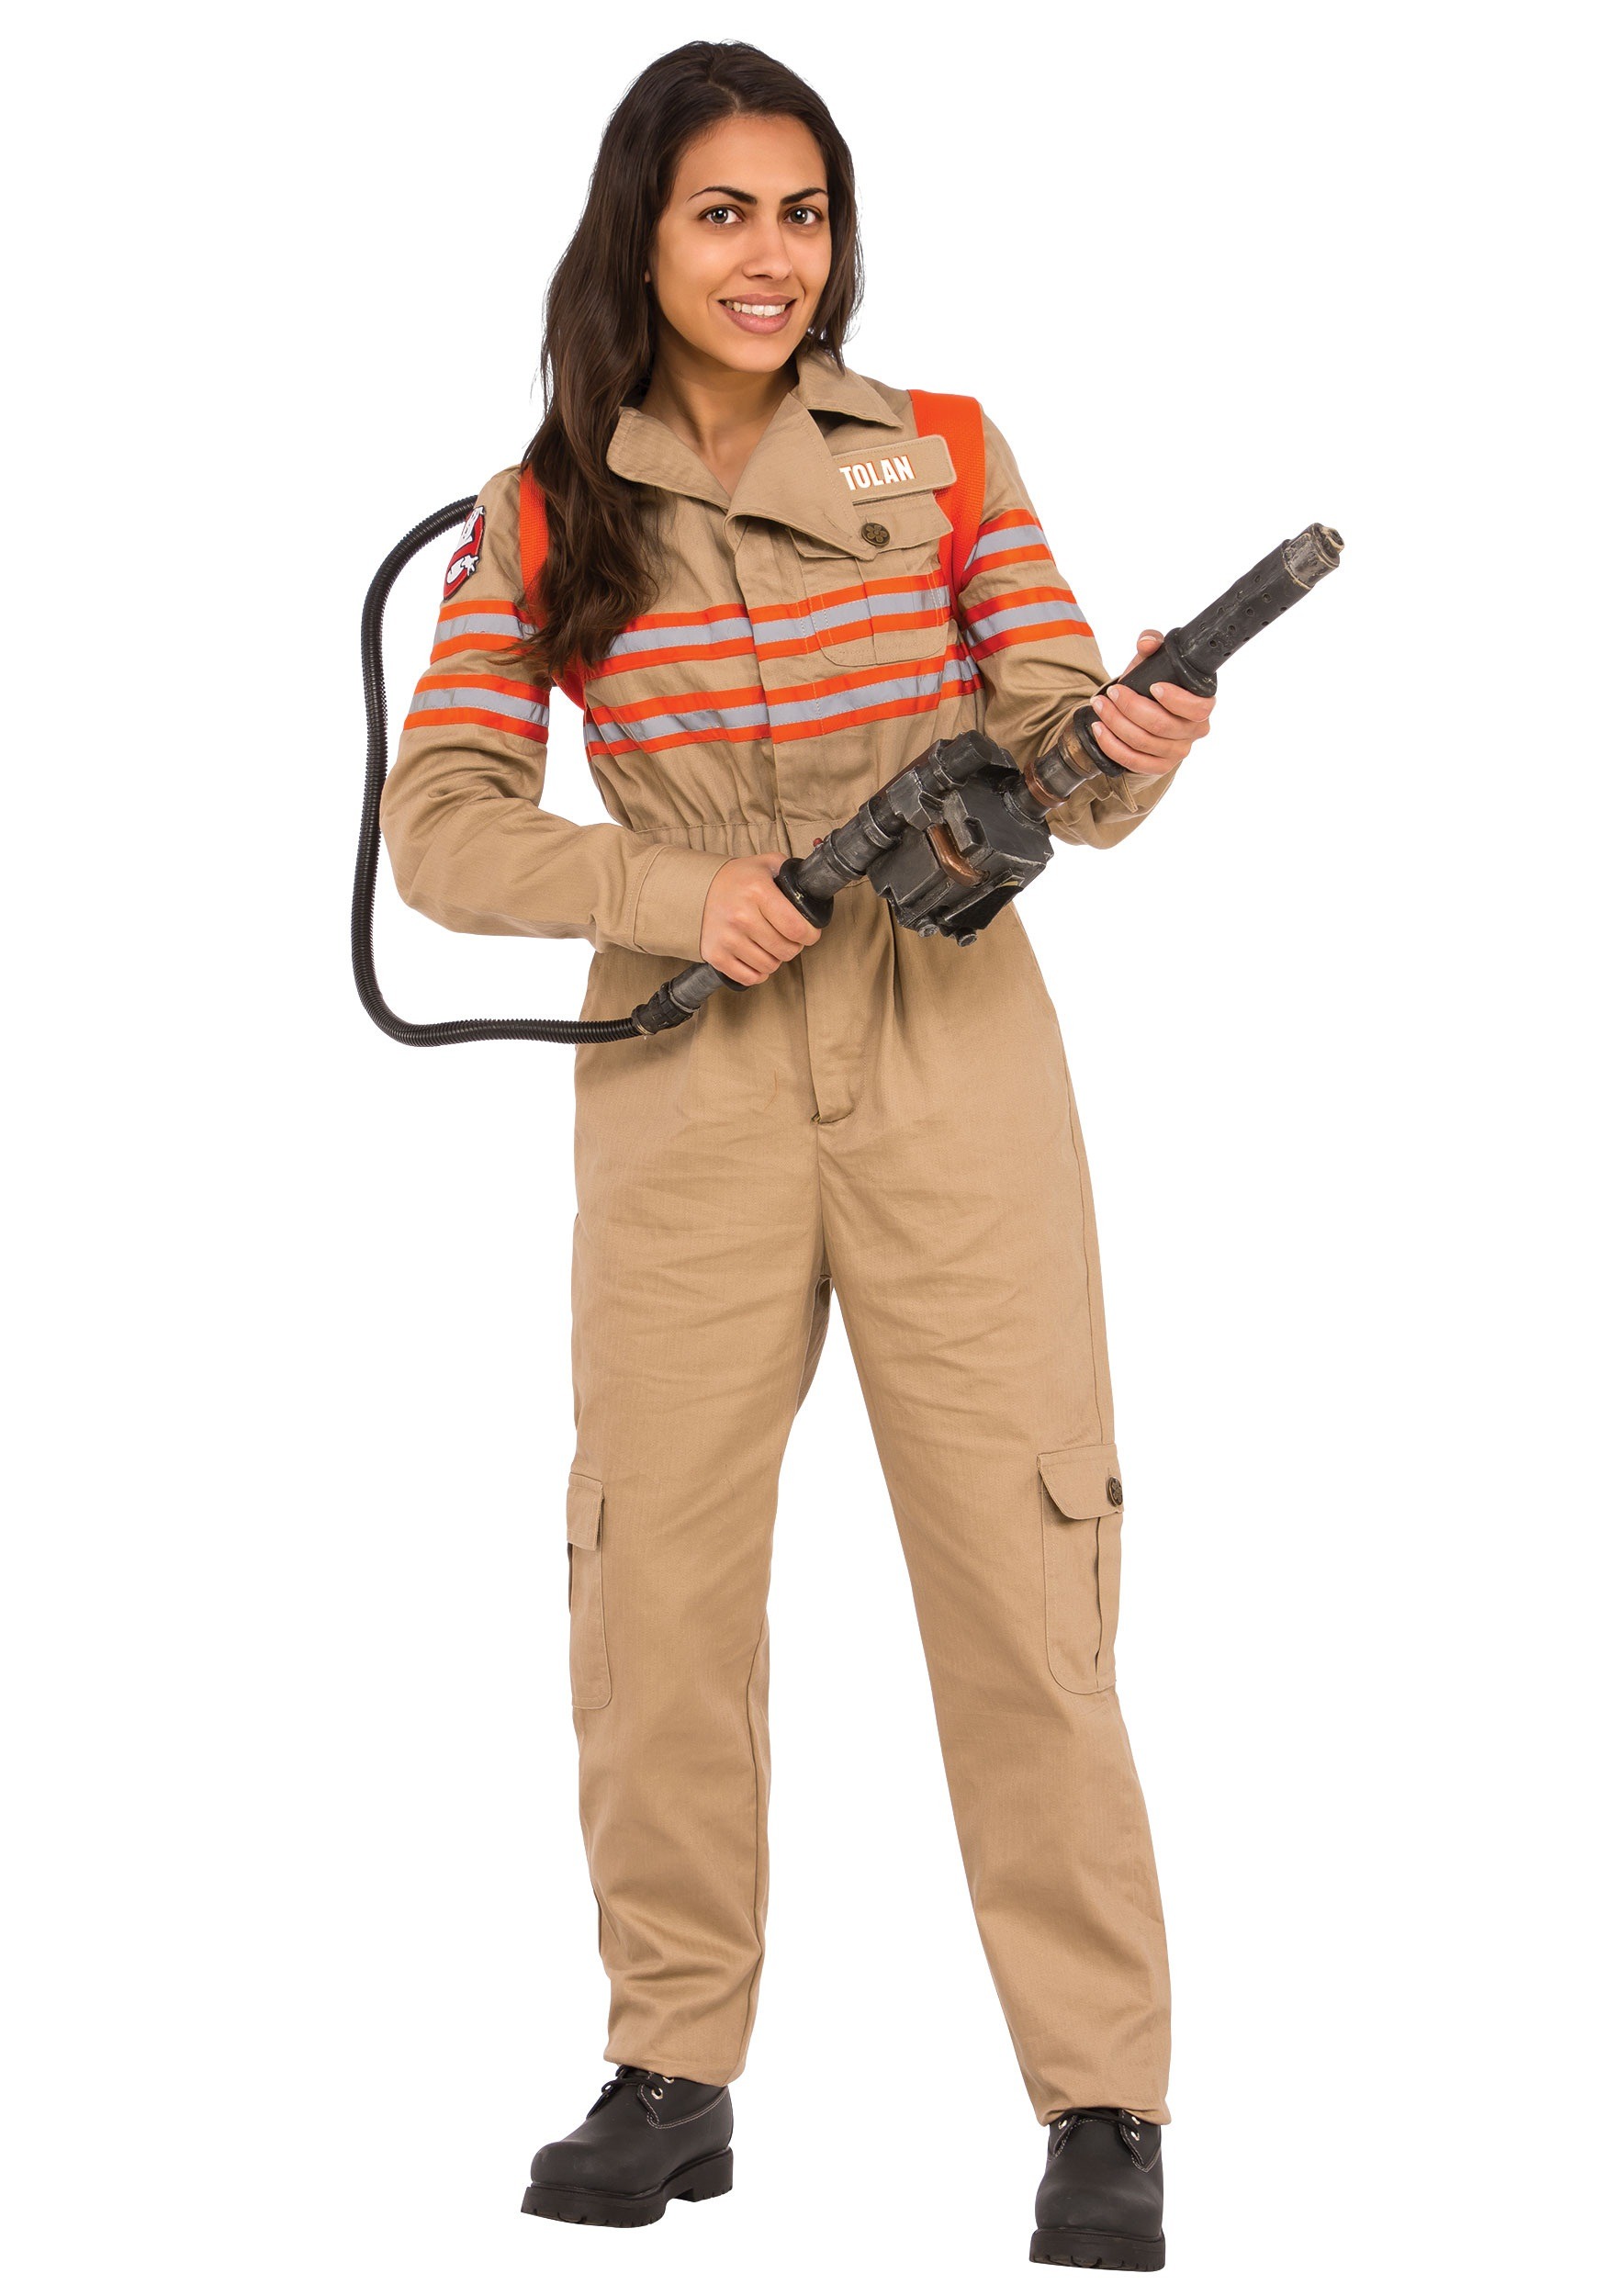 Sexy Ghostbuster Costumes 42